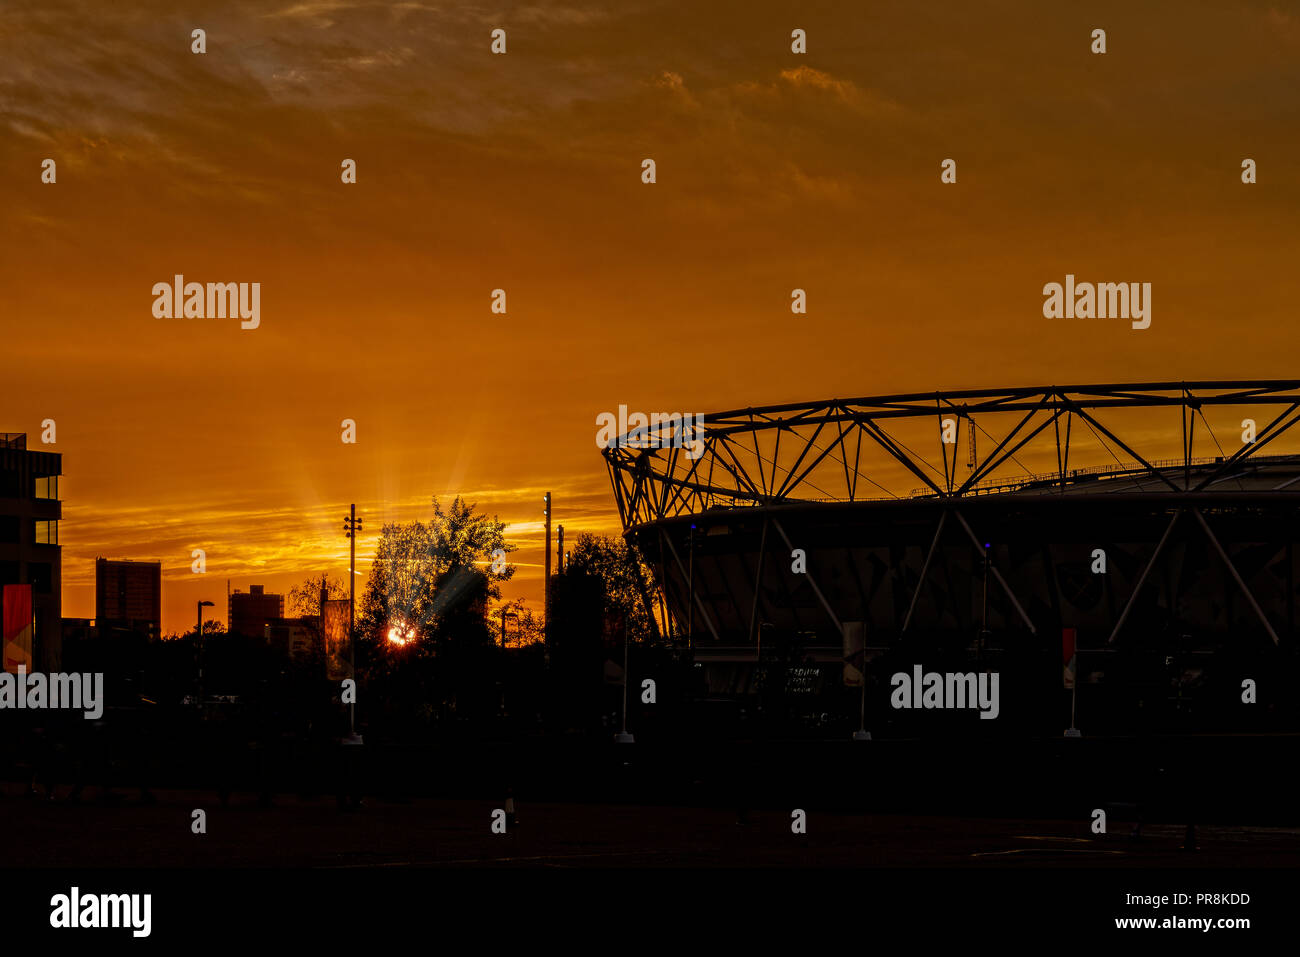 The silhouette of the Olympic Stadium in the Queen Elizabeth Park in London as the sunsets Stock Photo